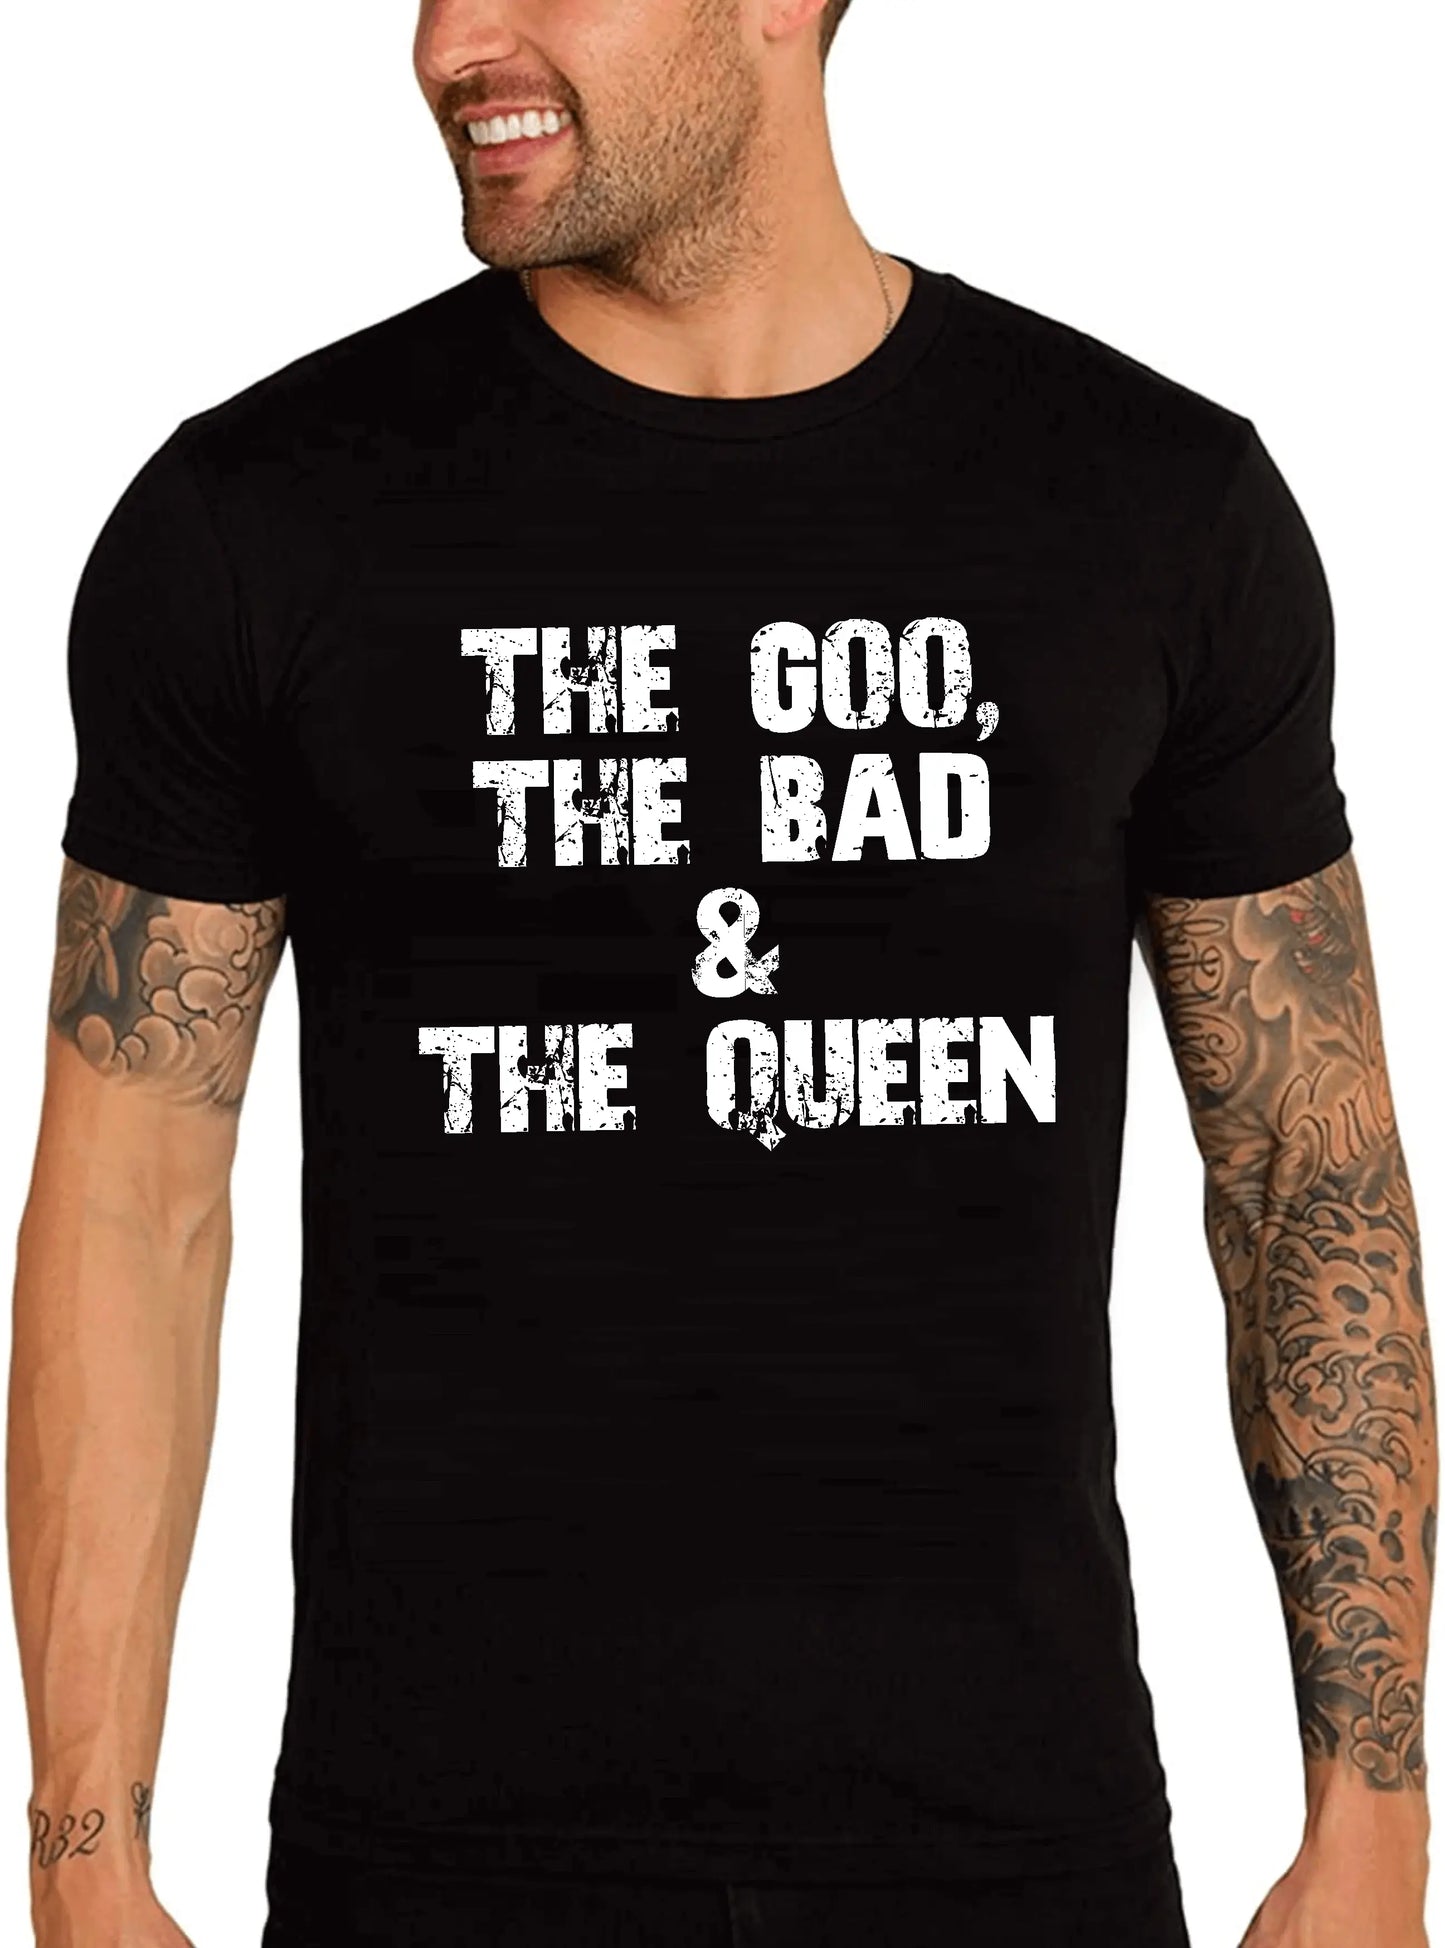 Men's Graphic T-Shirt The Goo The Bad & The Queen Eco-Friendly Limited Edition Short Sleeve Tee-Shirt Vintage Birthday Gift Novelty